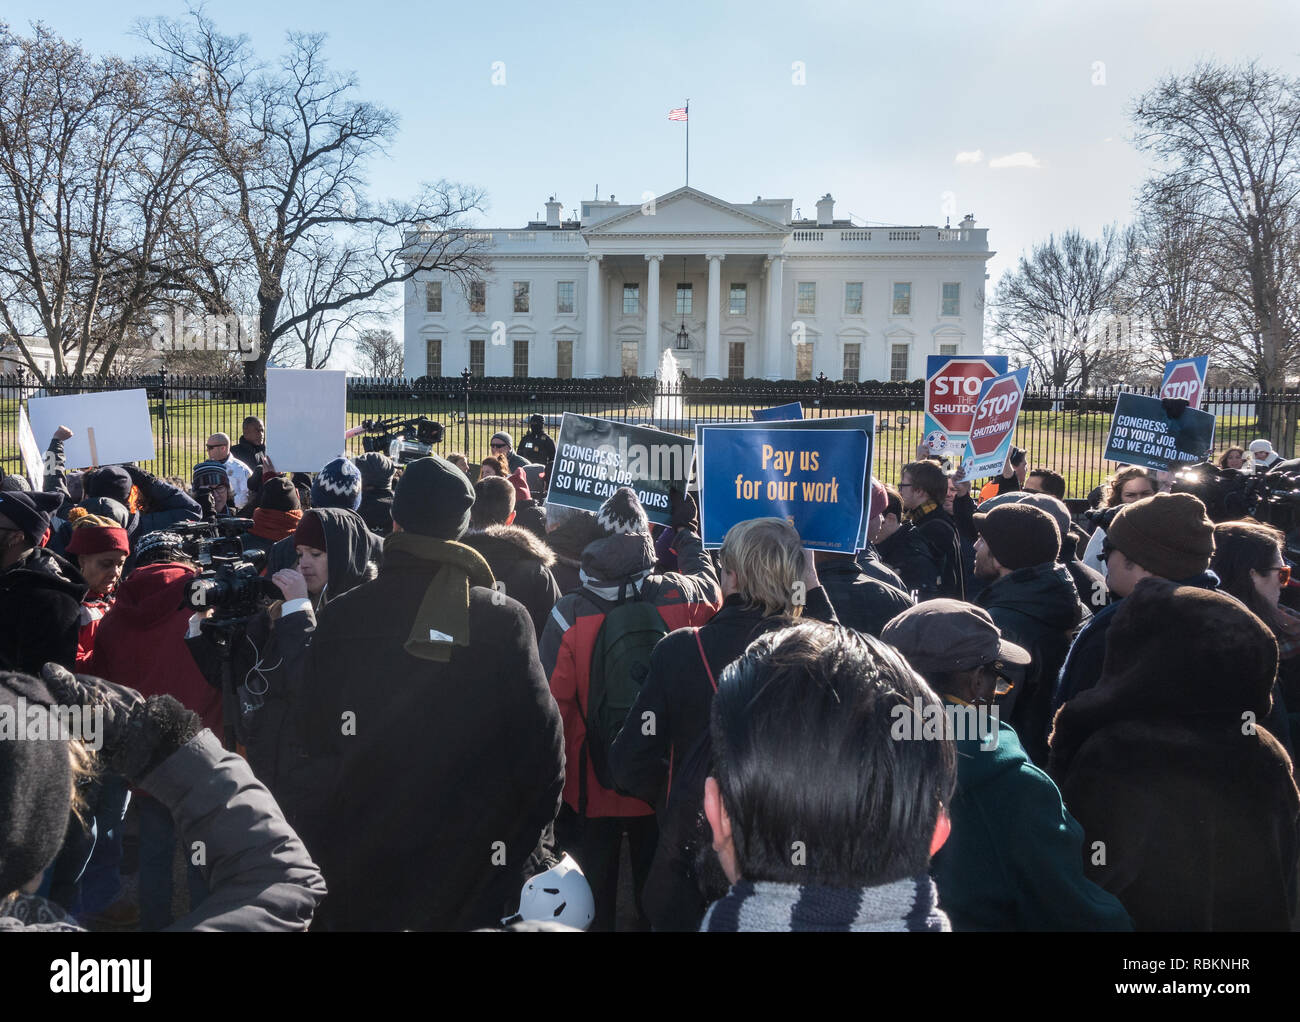 Washington, DC, USA.  10th January, 2019. Protesting the partial government shutdown, hundreds of furloughed as well as unpaid working federal employees, and supporters marched to the White House after a rally outside the nearby AFL-CIO headquarters, where they heard from union leaders and members of congress calling for President Trump and Republican senate majority leader Mitch McConnell to end the shutdown. Bob Korn/Alamy Live News Stock Photo